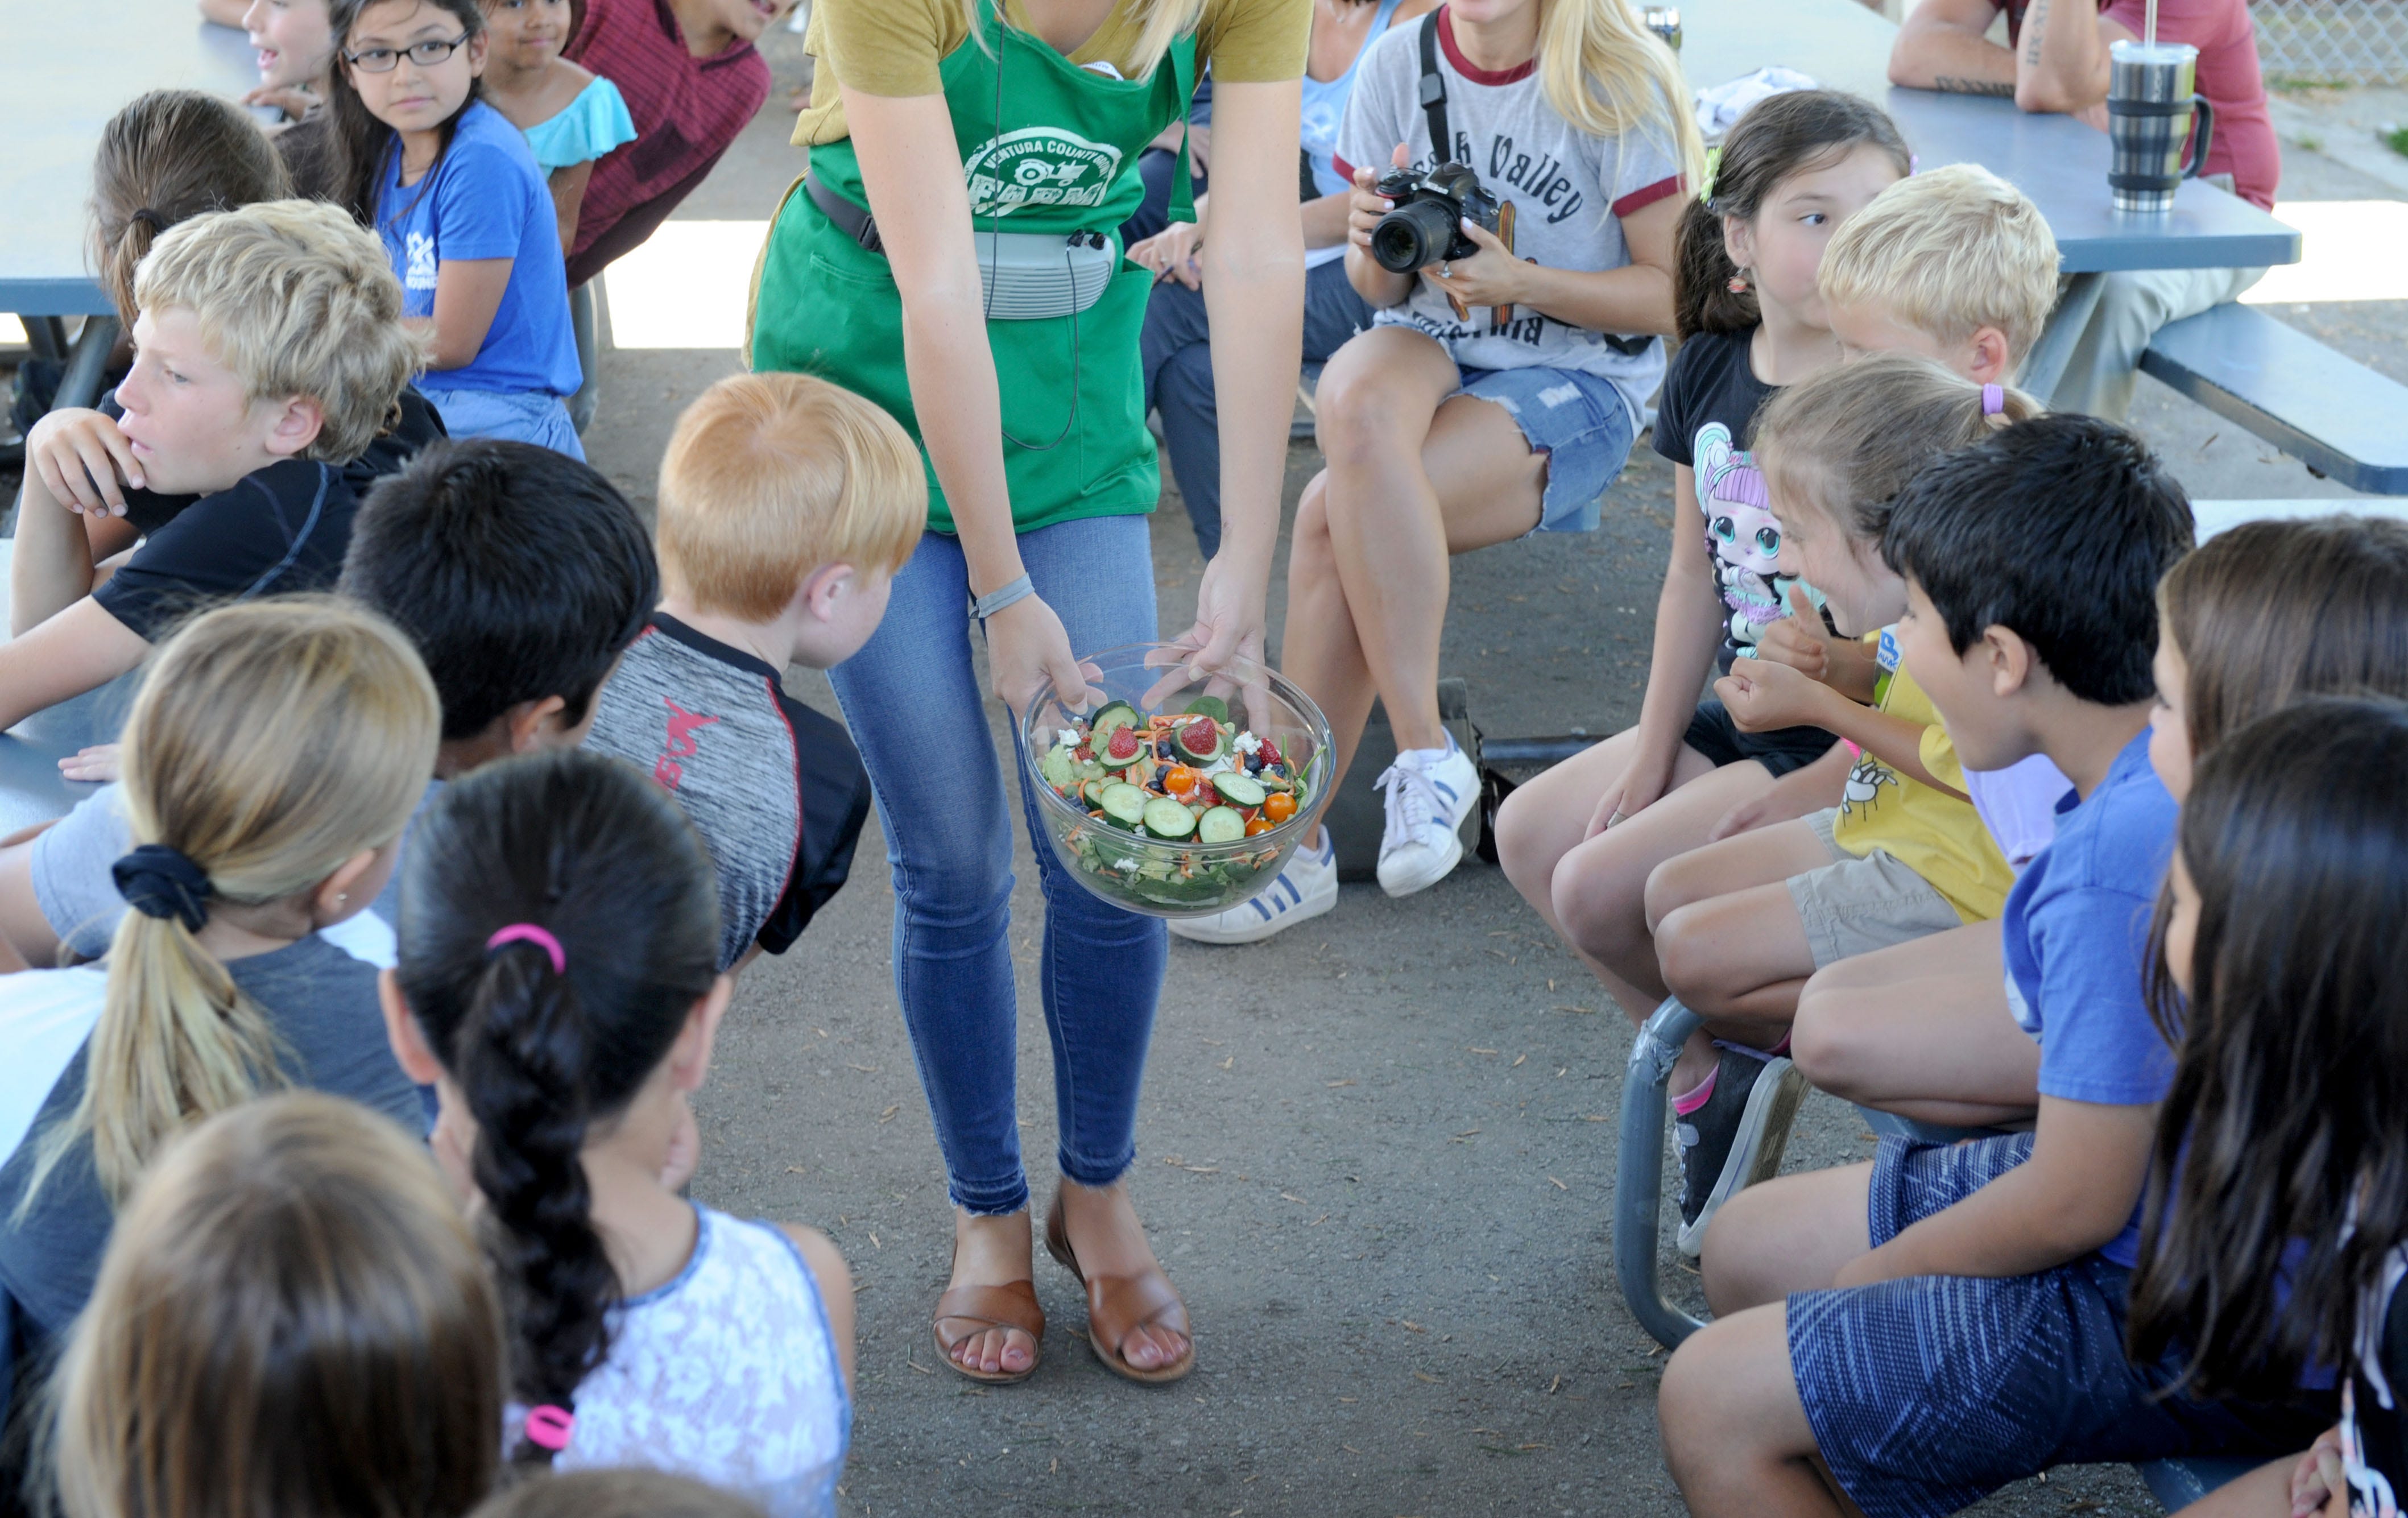 Emily Skaar, nutritional program coordinator for Students for Eco-Education and Agriculture, shows a salad to a group of third-graders as the nonprofit's 30-foot Farm Fresh van came to Mound Elementary in Ventura.